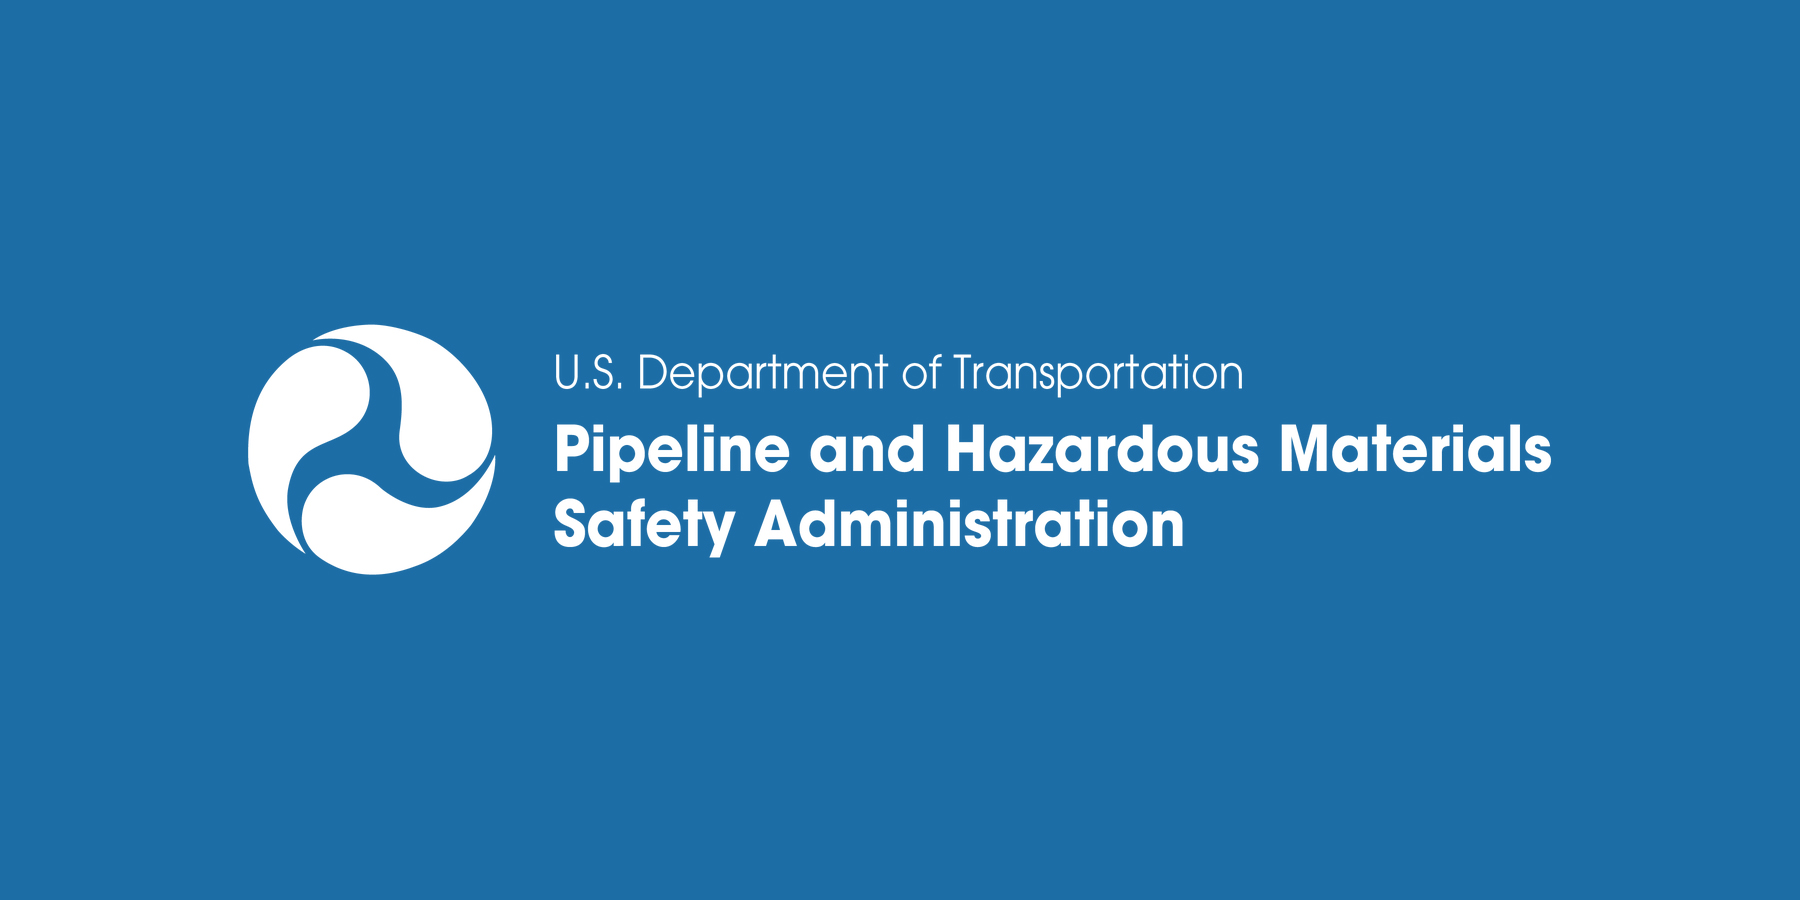 Pipeline and Hazardous Materials Safety Administration Logo